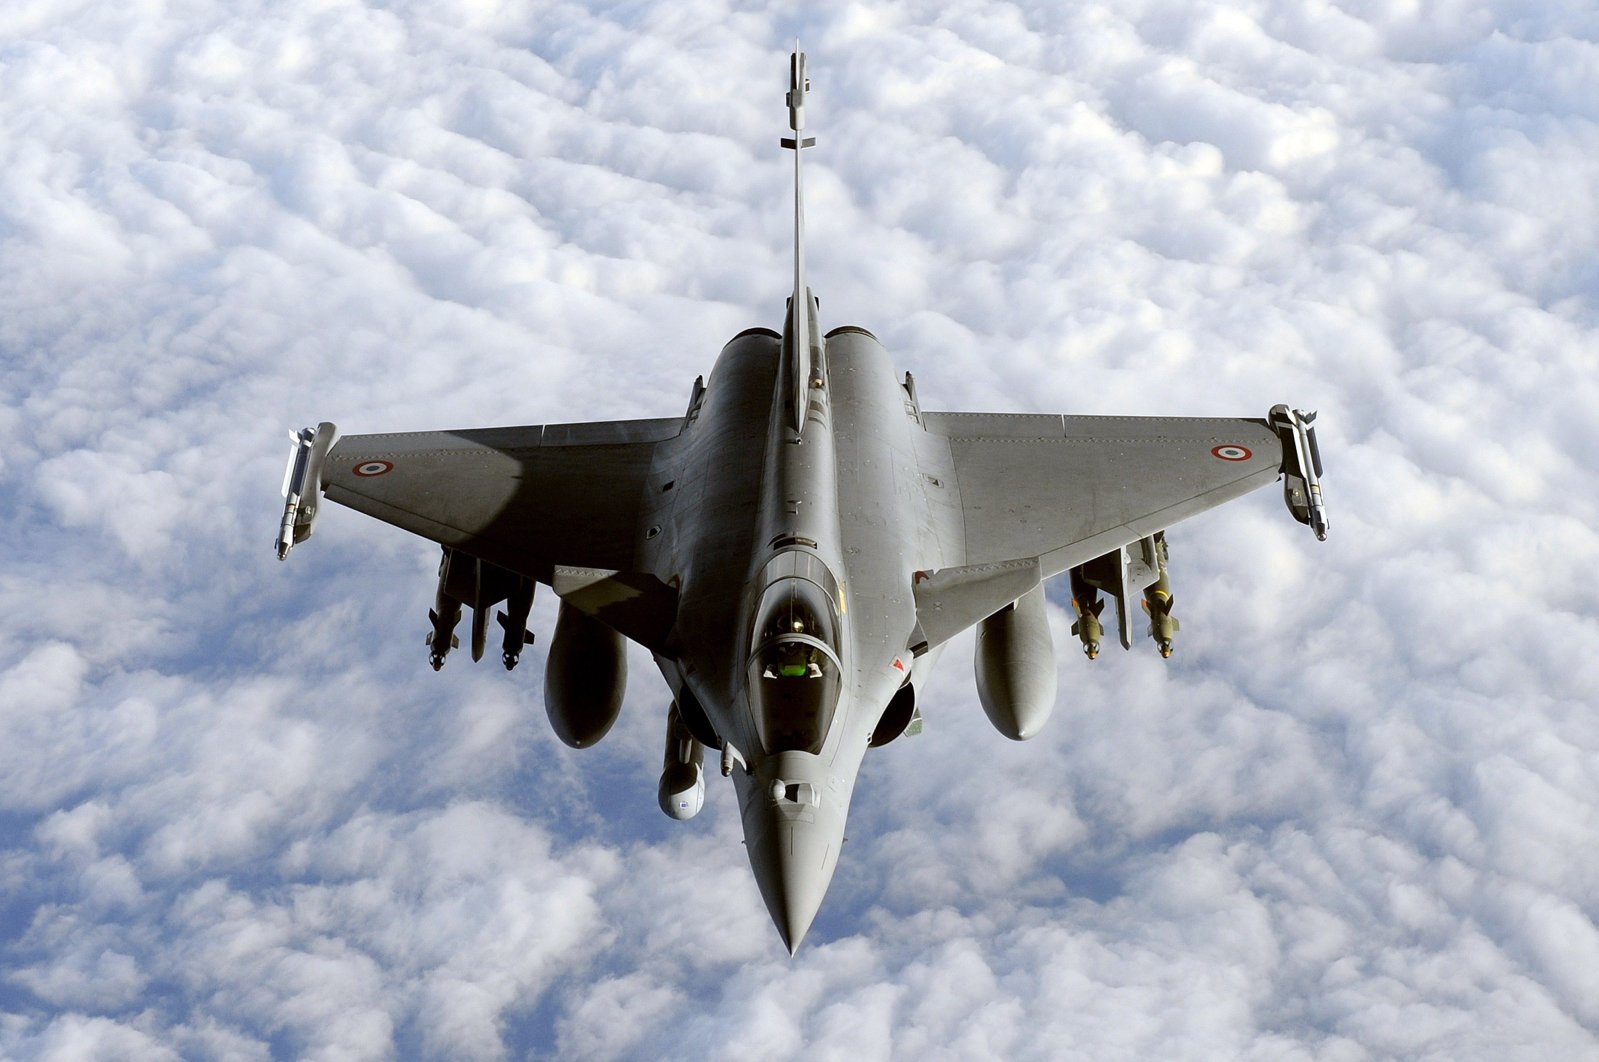 A French Rafale fighter jet from the Istres military air base approaches an airborne Boeing C-135 refueling tanker aircraft (not pictured) on March 30, 2011. (AFP Photo)